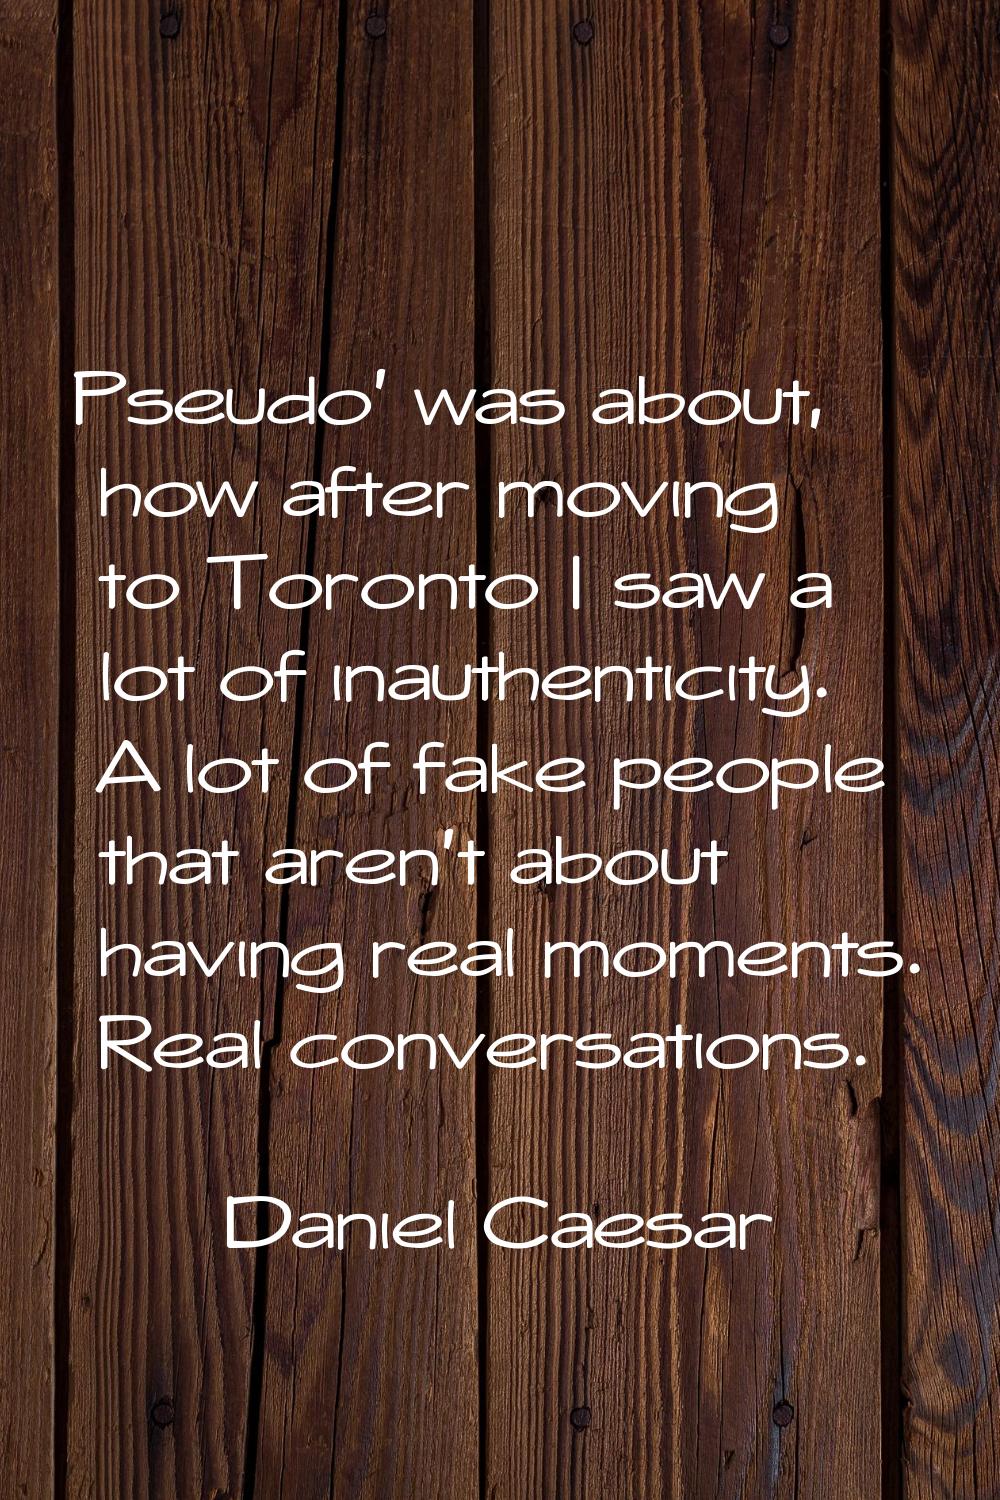 Pseudo' was about, how after moving to Toronto I saw a lot of inauthenticity. A lot of fake people 